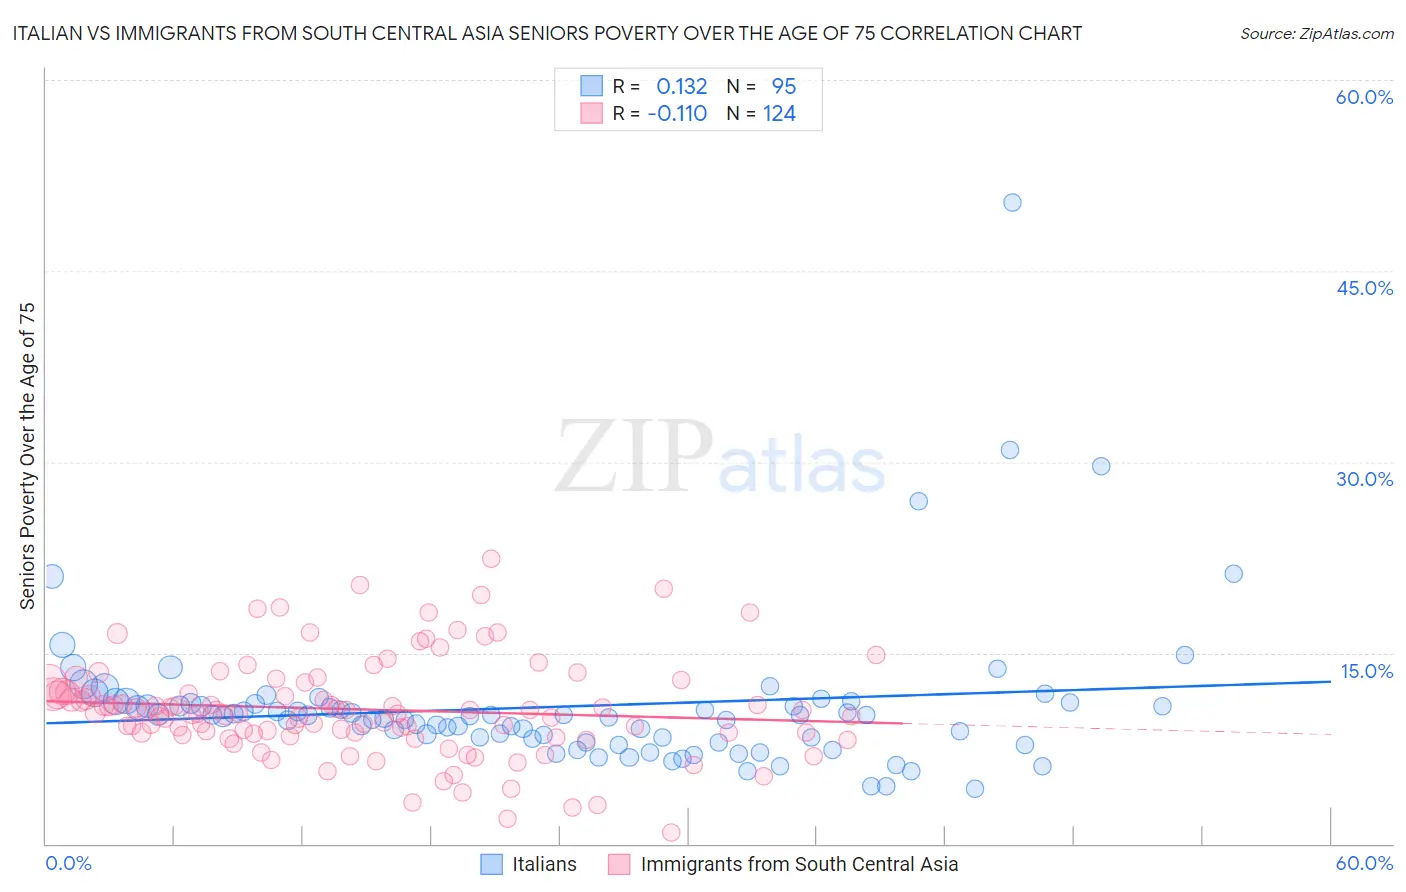 Italian vs Immigrants from South Central Asia Seniors Poverty Over the Age of 75